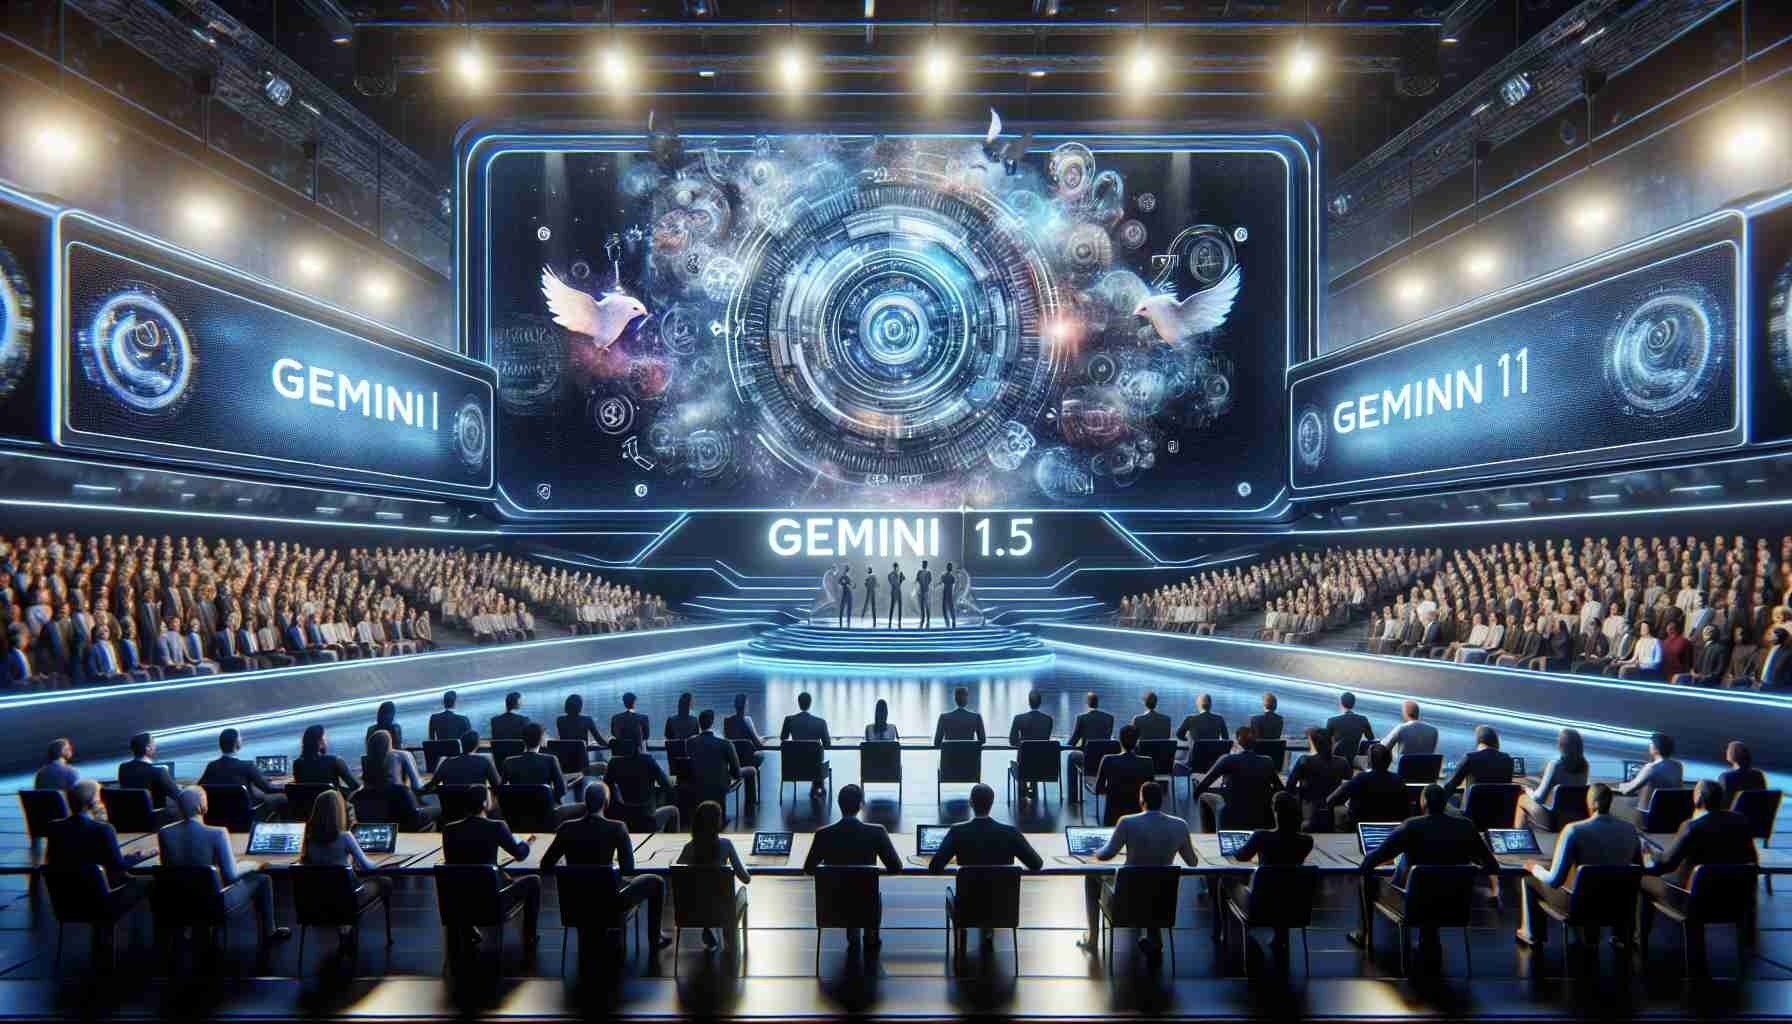 Google introduces Gemini 1.5, the next generation of the company's artificial intelligence model – Google